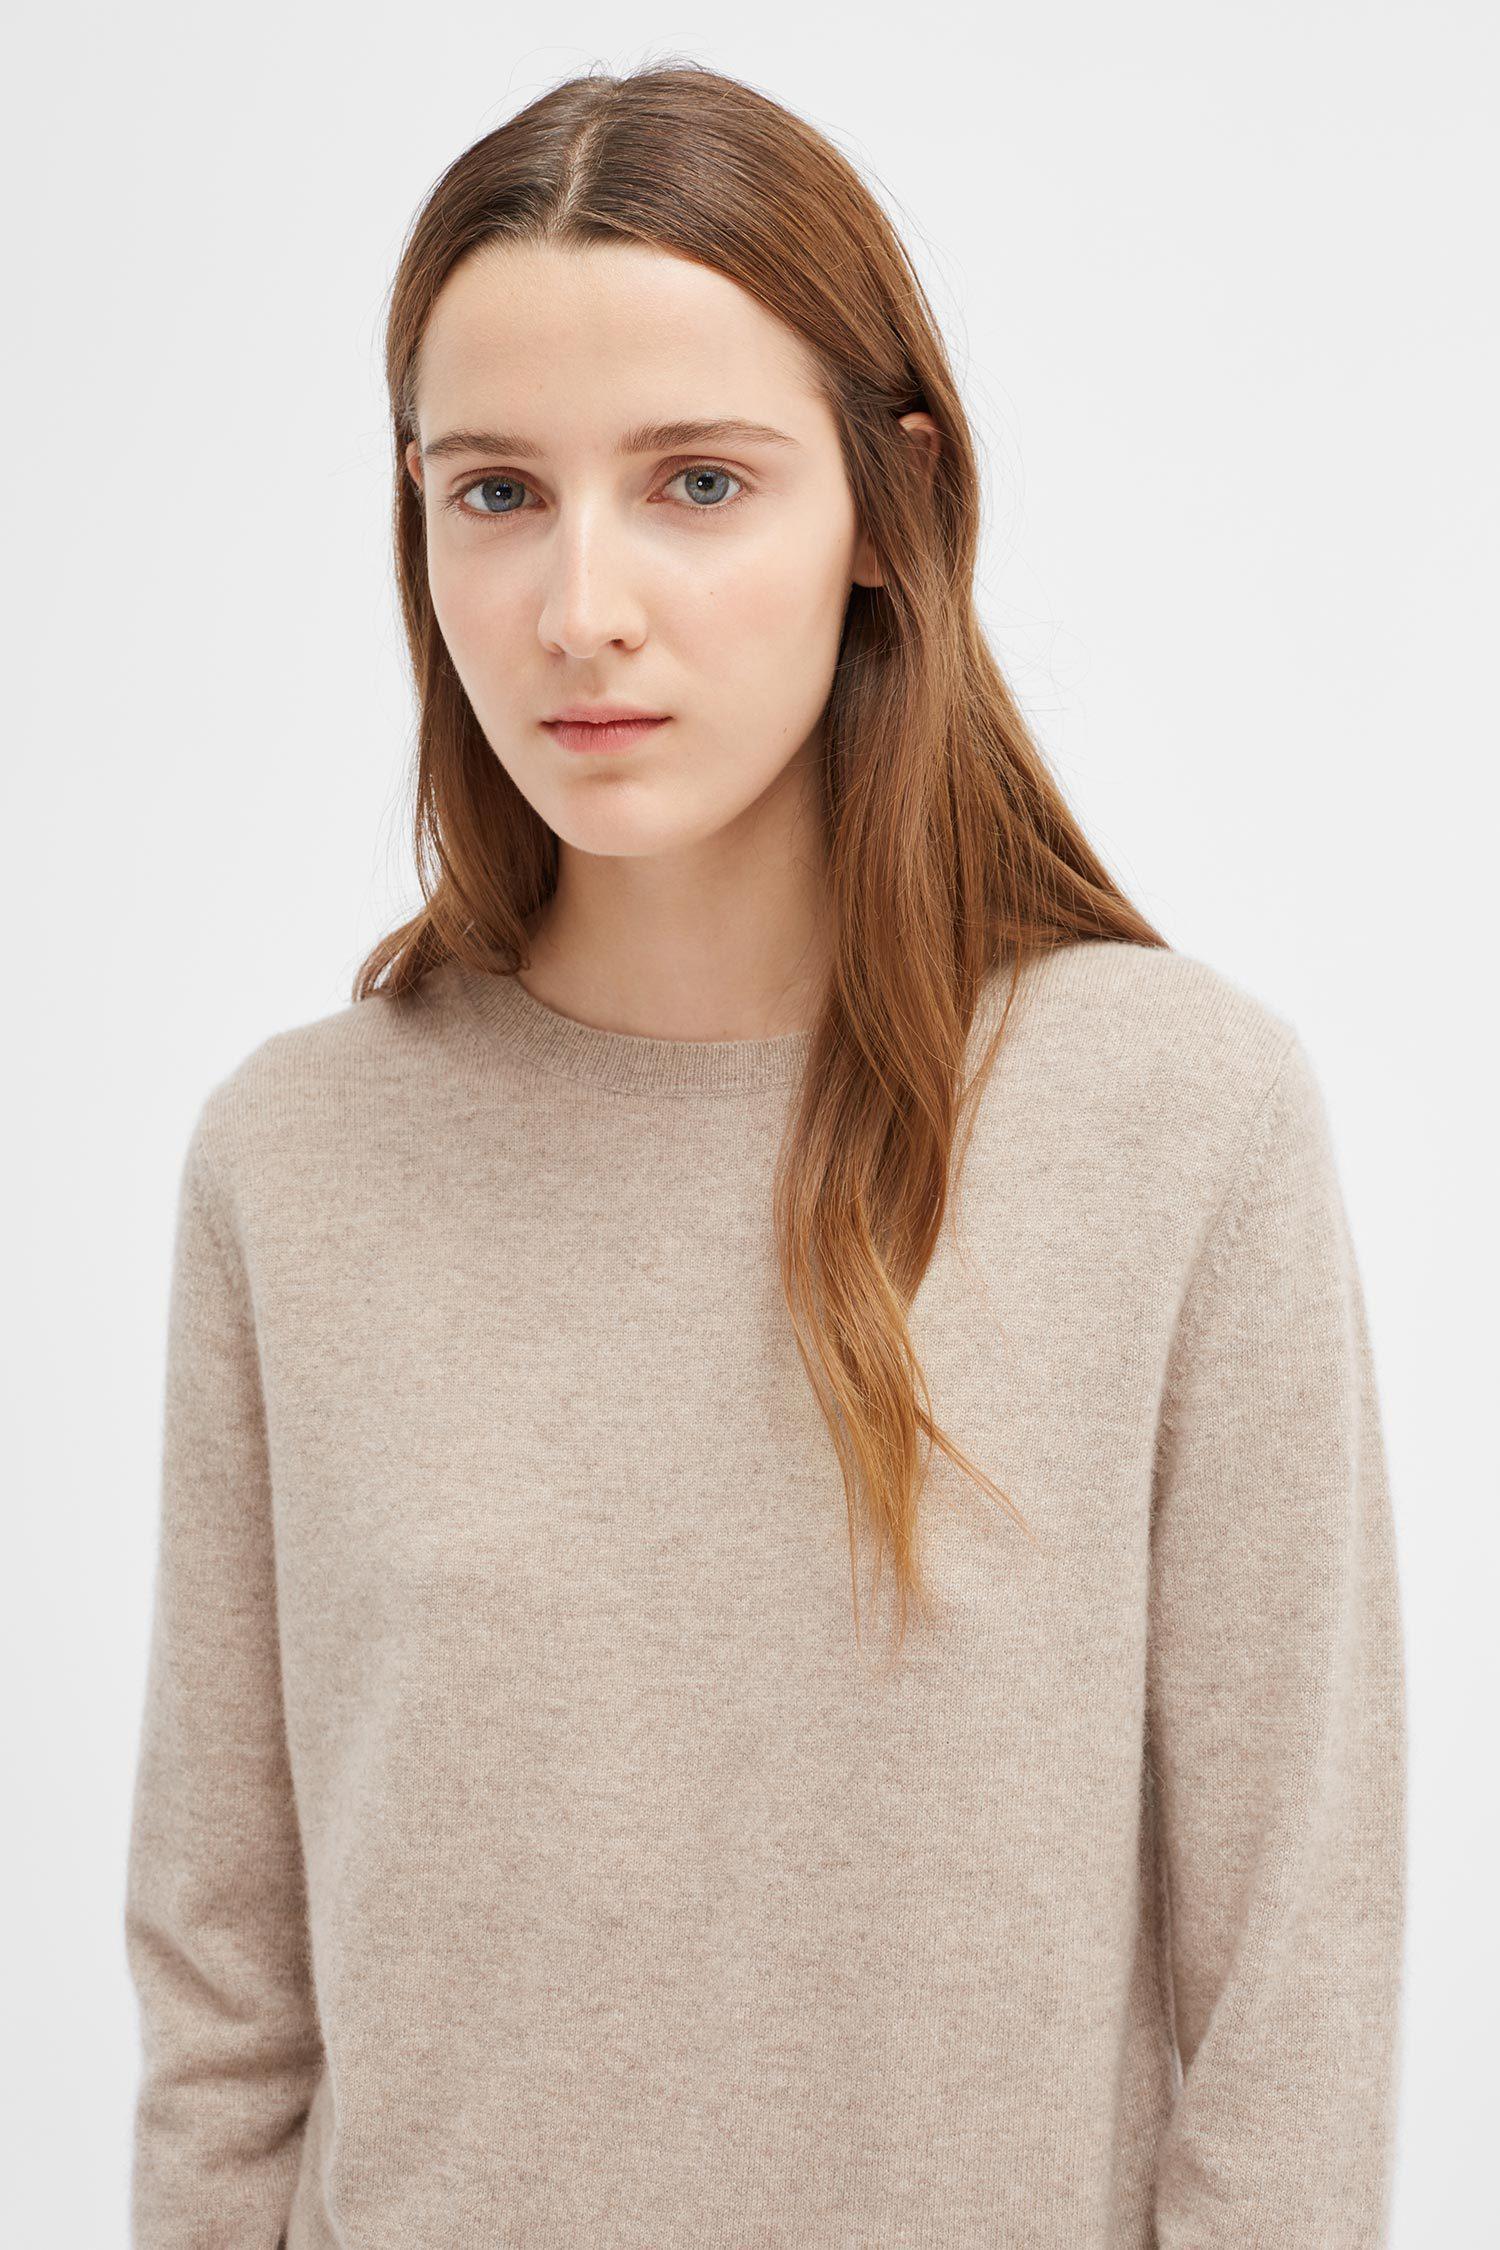 Lyst - Chinti & Parker Oatmeal Cashmere Crew Sweater in Natural